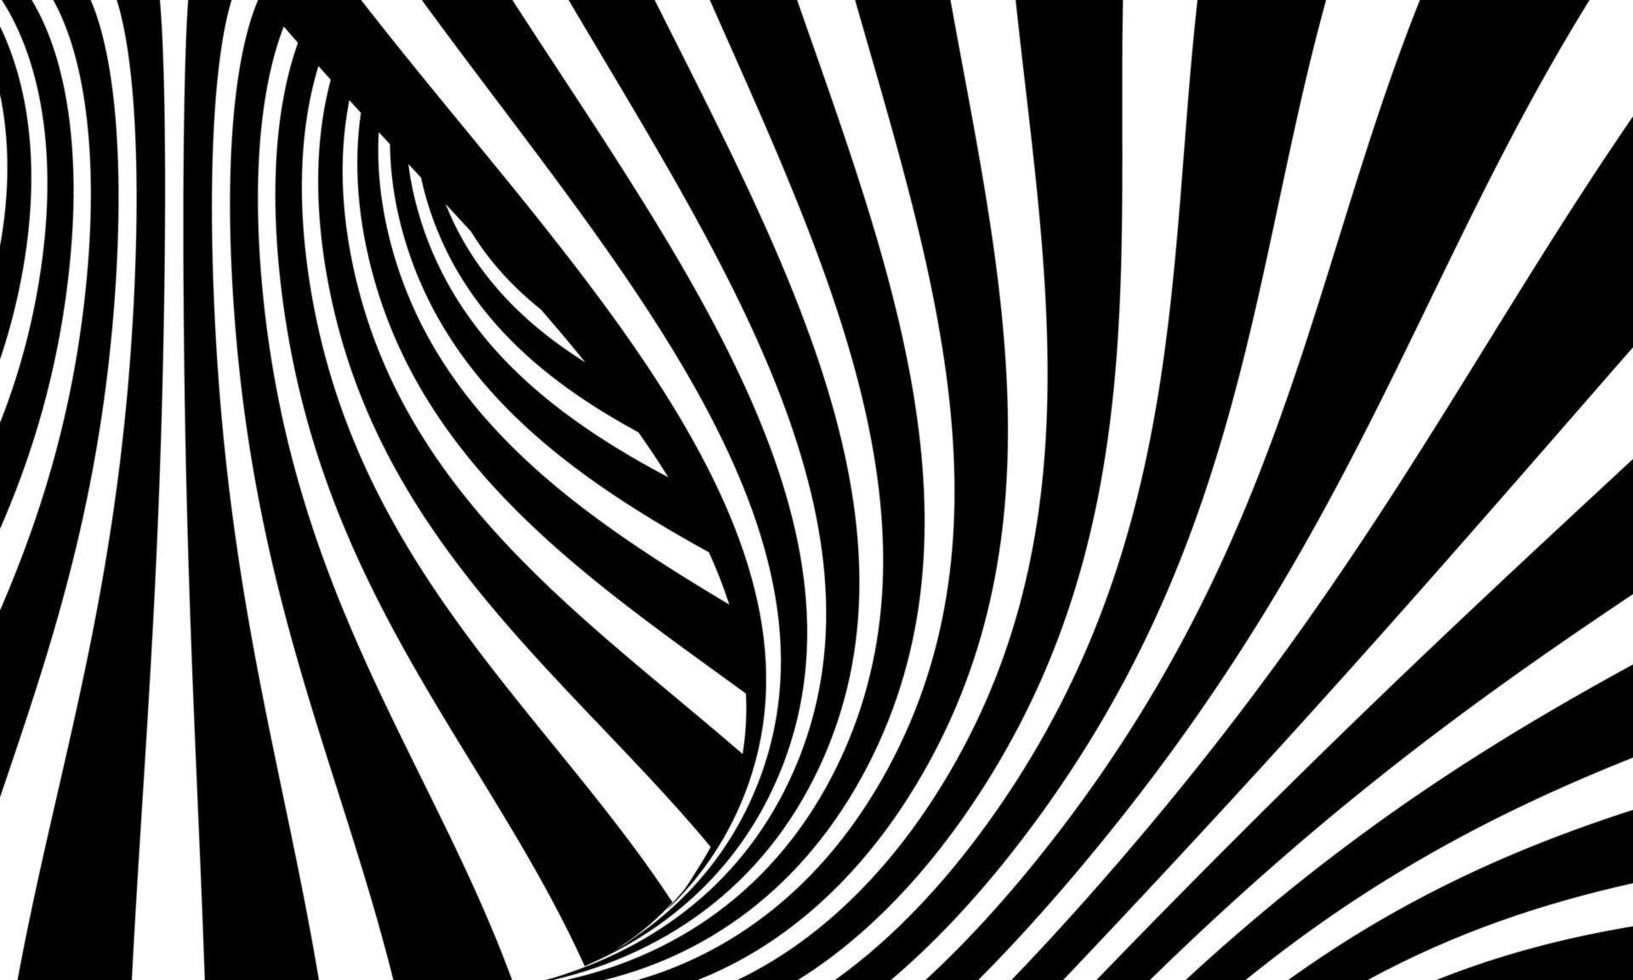 abstract background illustration black and white design pattern with optical illusion abstract geometrical part 3 vector